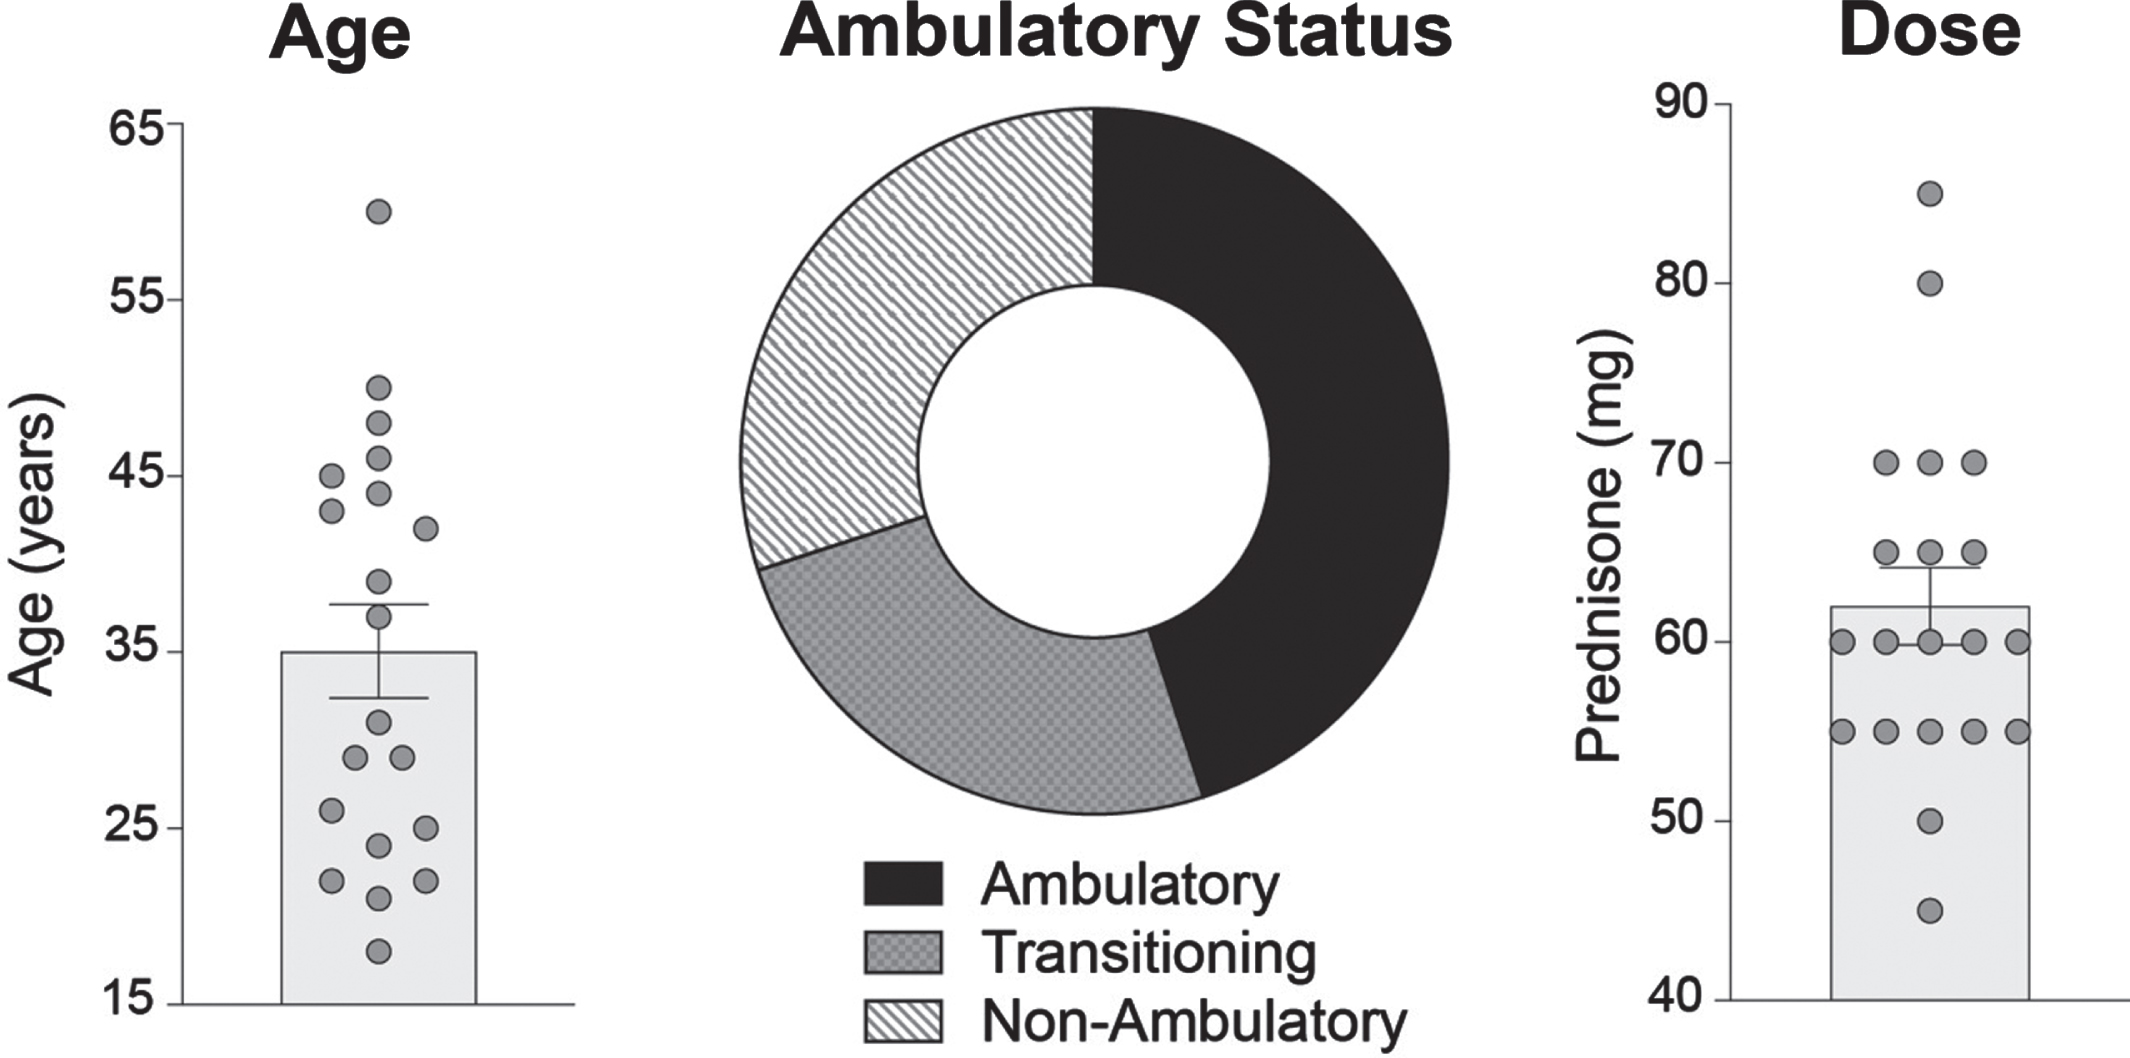 WSiMD study demographics. The average age of participants enrolled in the trial was 35 years (range 18 to 60 years). A total of twenty patients were enrolled (7 females and 13 males). Ambulatory status was determined using Vignos lower extremity score. 9 patients were ambulatory, 6 were non-ambulatory, and 5 were considered transitioning to non-ambulatory. Dosing determined by weight: < 70 kg treated with 1.0 mg/kg/week and > 70 kg treated with 0.75 mg/kg/week. Dosing occurred weekly on Monday nights, after dinner, between 7–9 pm. The average weekly dose was 62 mg, with a range of 45 to 85 mg.